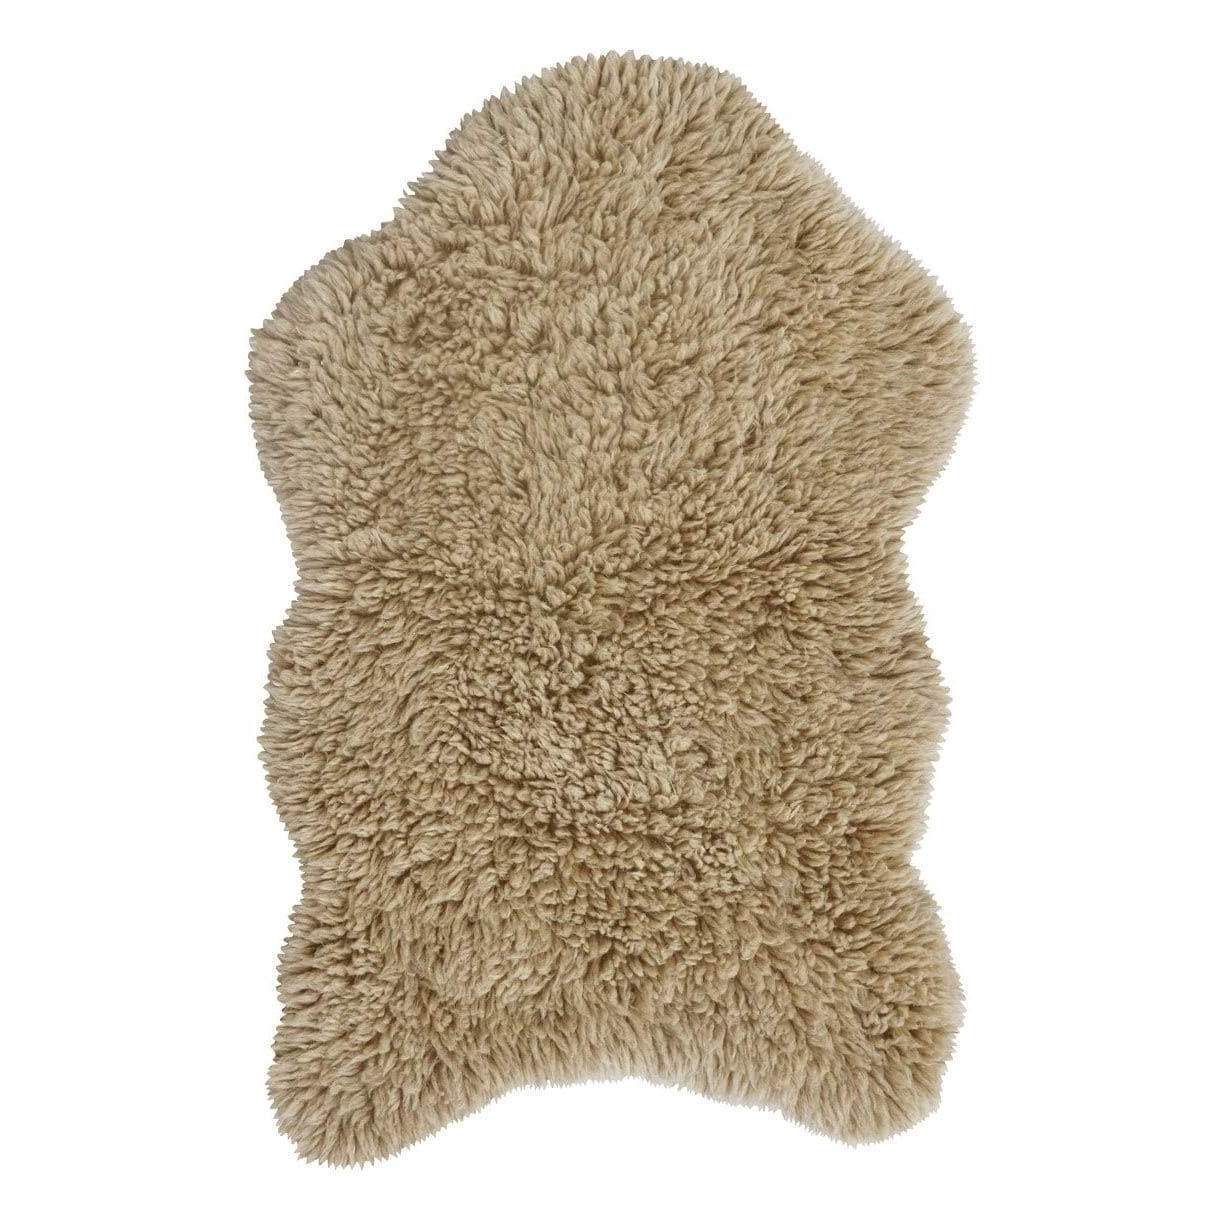 Lorena Canals Woolly Beige Woolable Area Rug